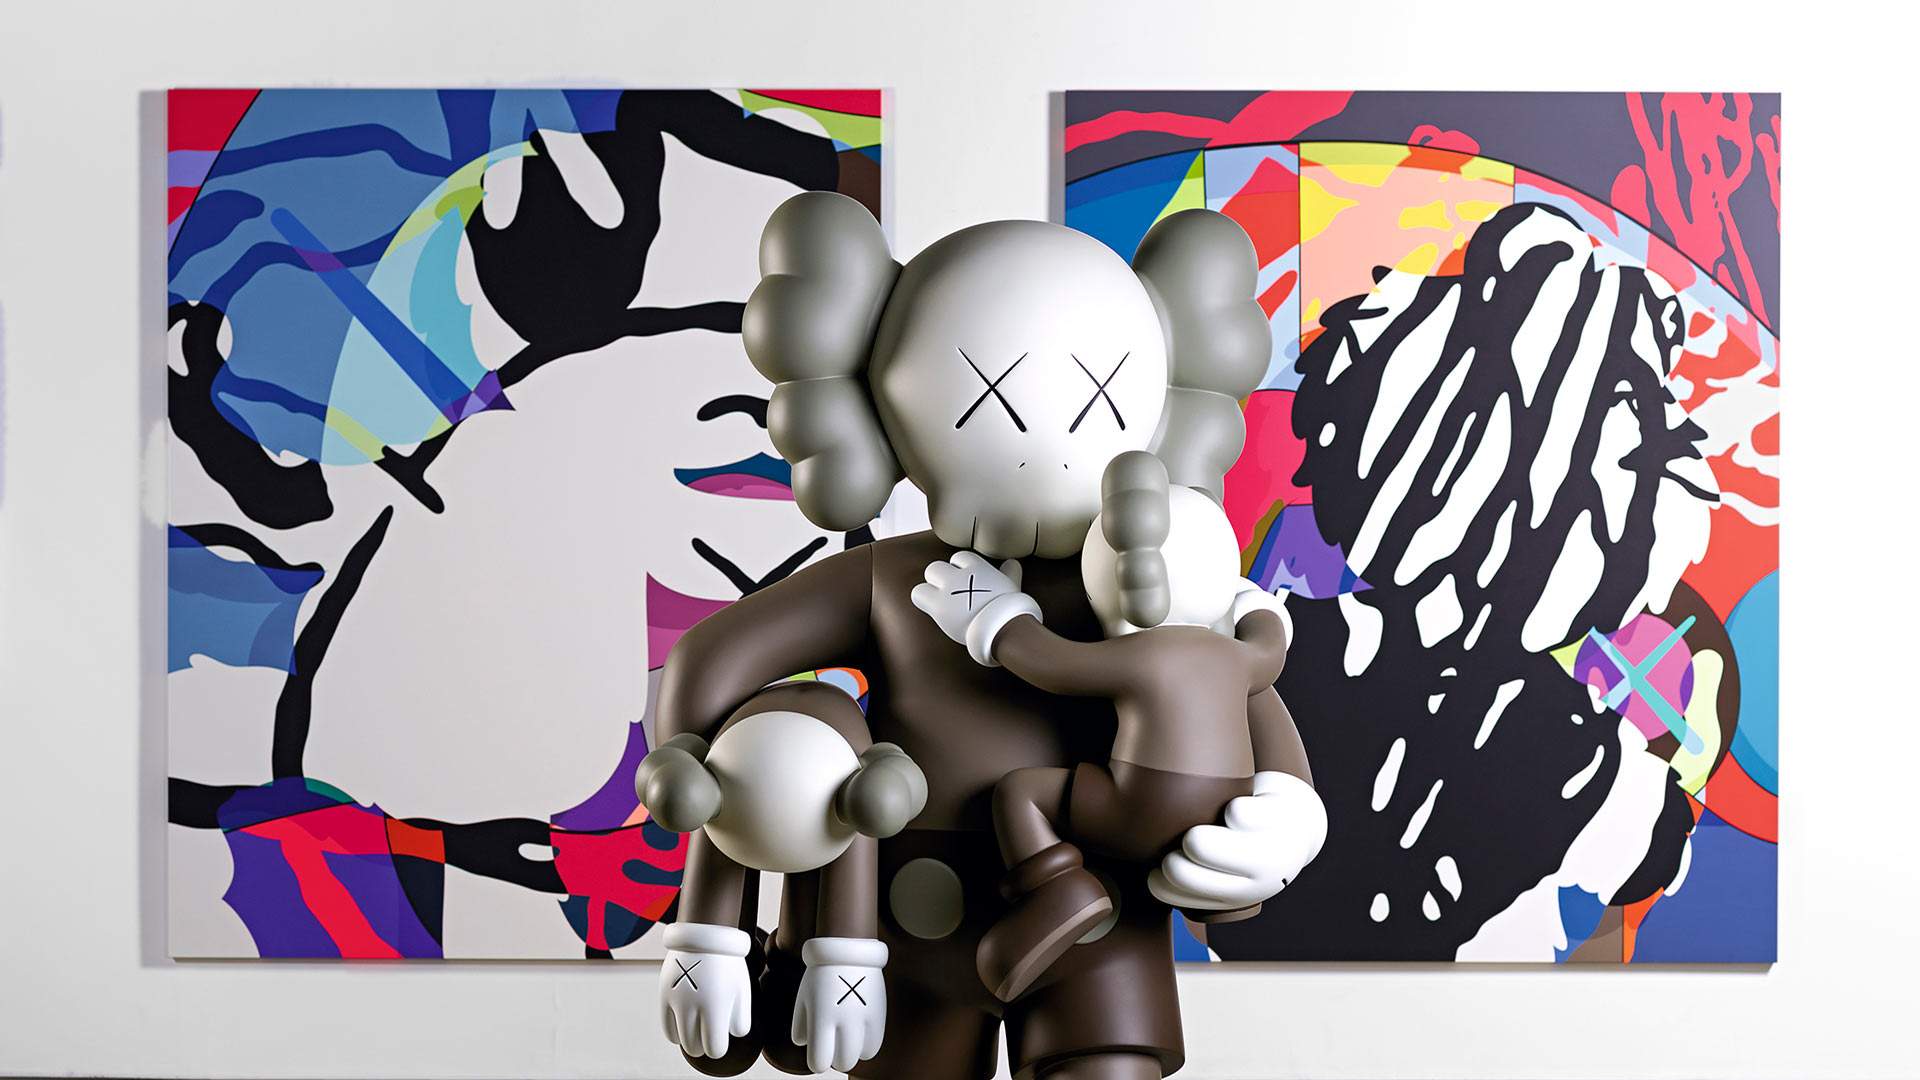 World-Renowned Artist Kaws Is Bringing His Large-Scale Pop-Culture Sculptures to the NGV